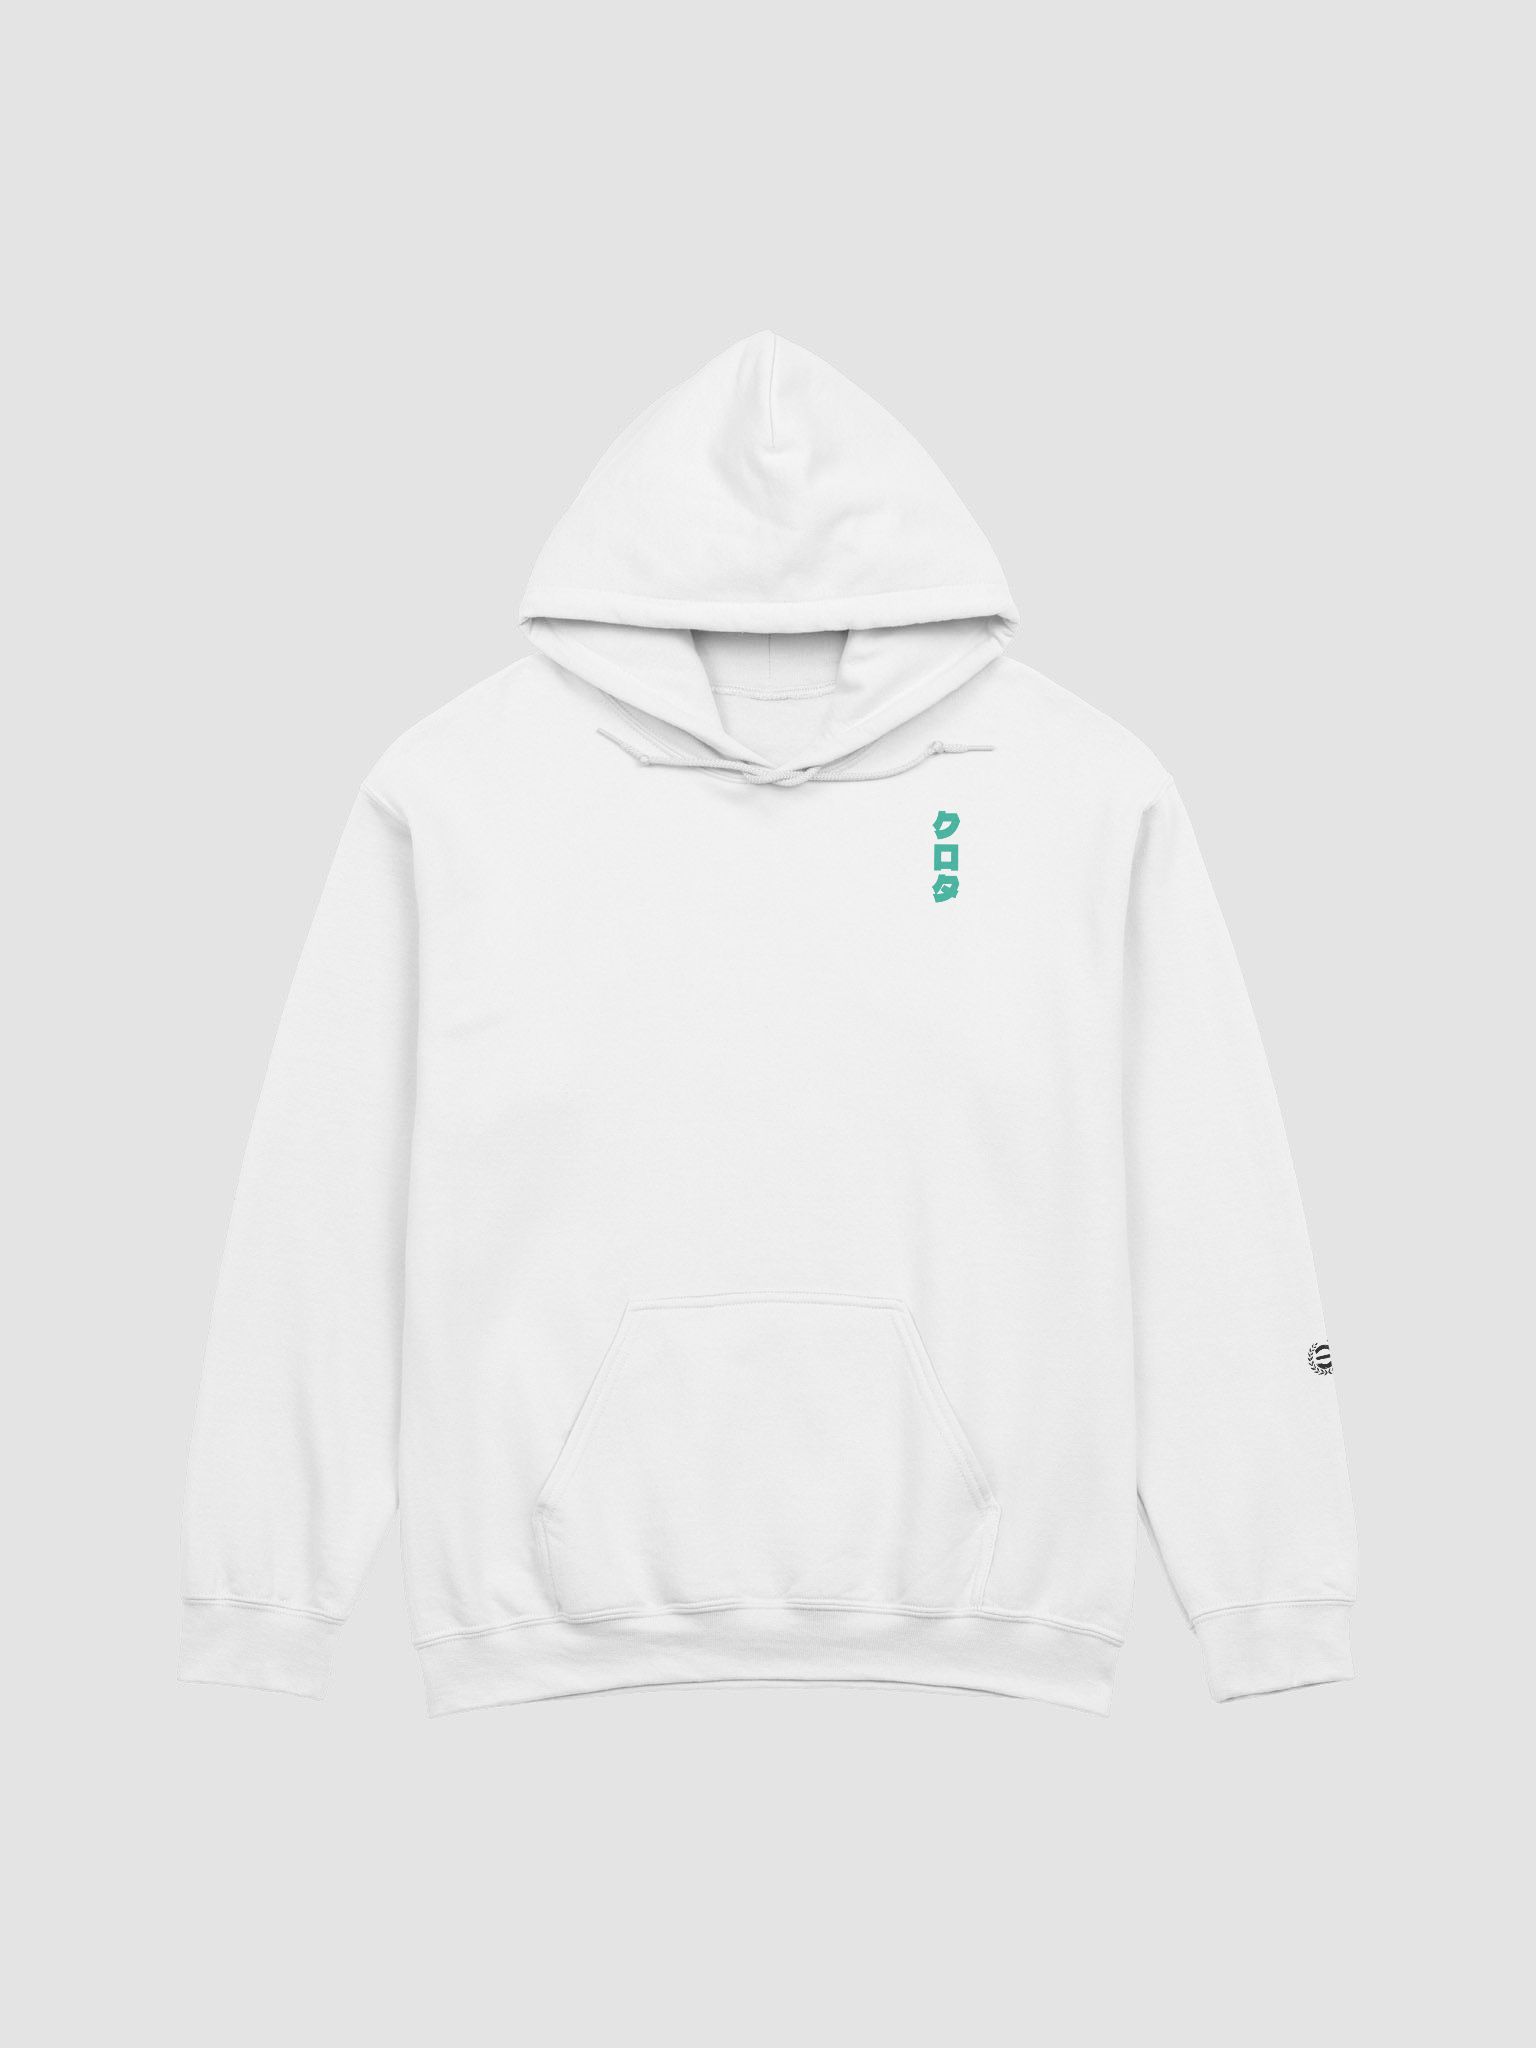 White/Green] Crota The Hive Prince of the Oversoul Hoodie | evanf1997